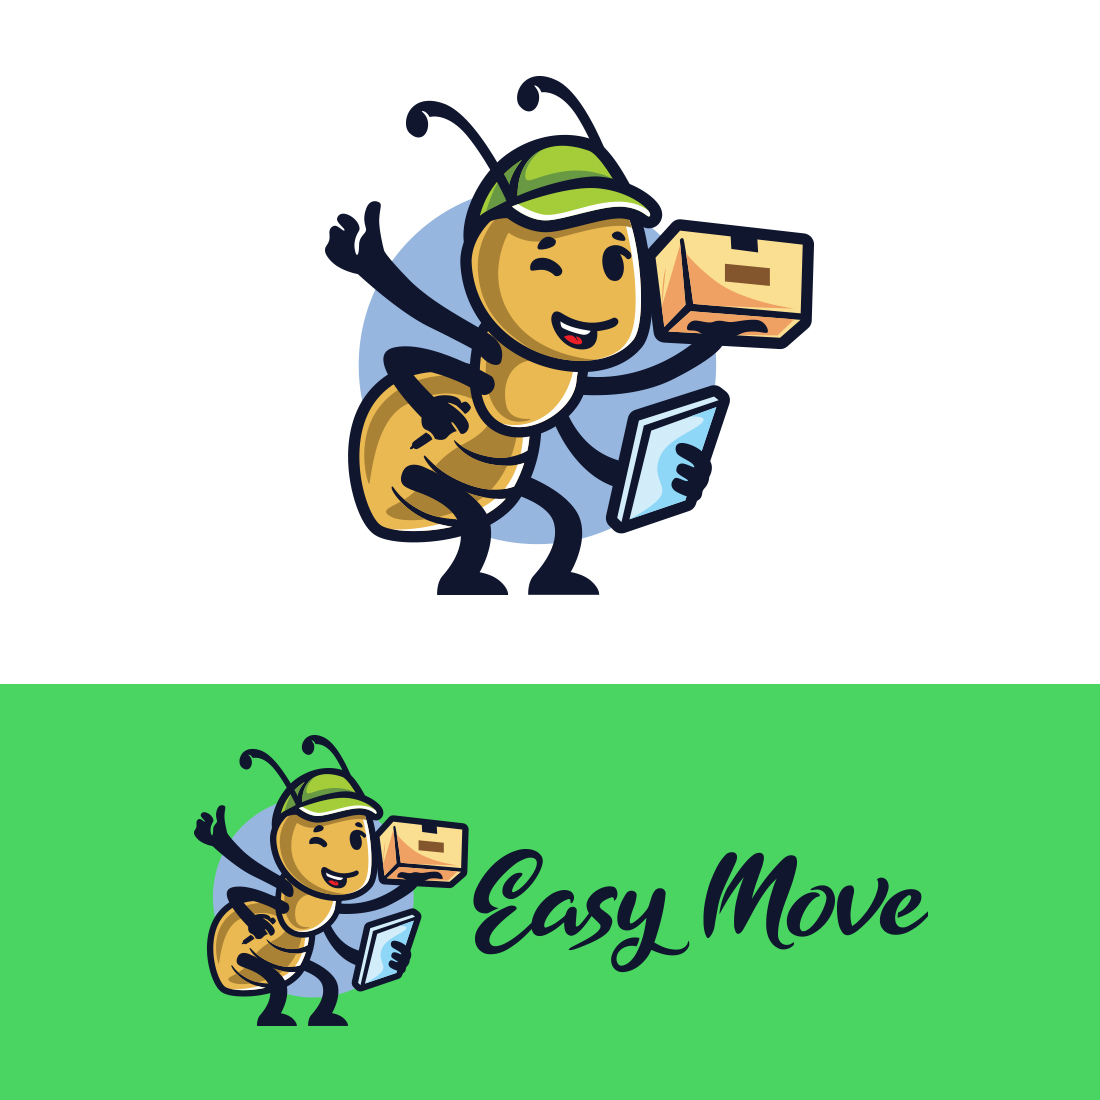 Easy Move - Ant Caracter Mascot Logo cover image.